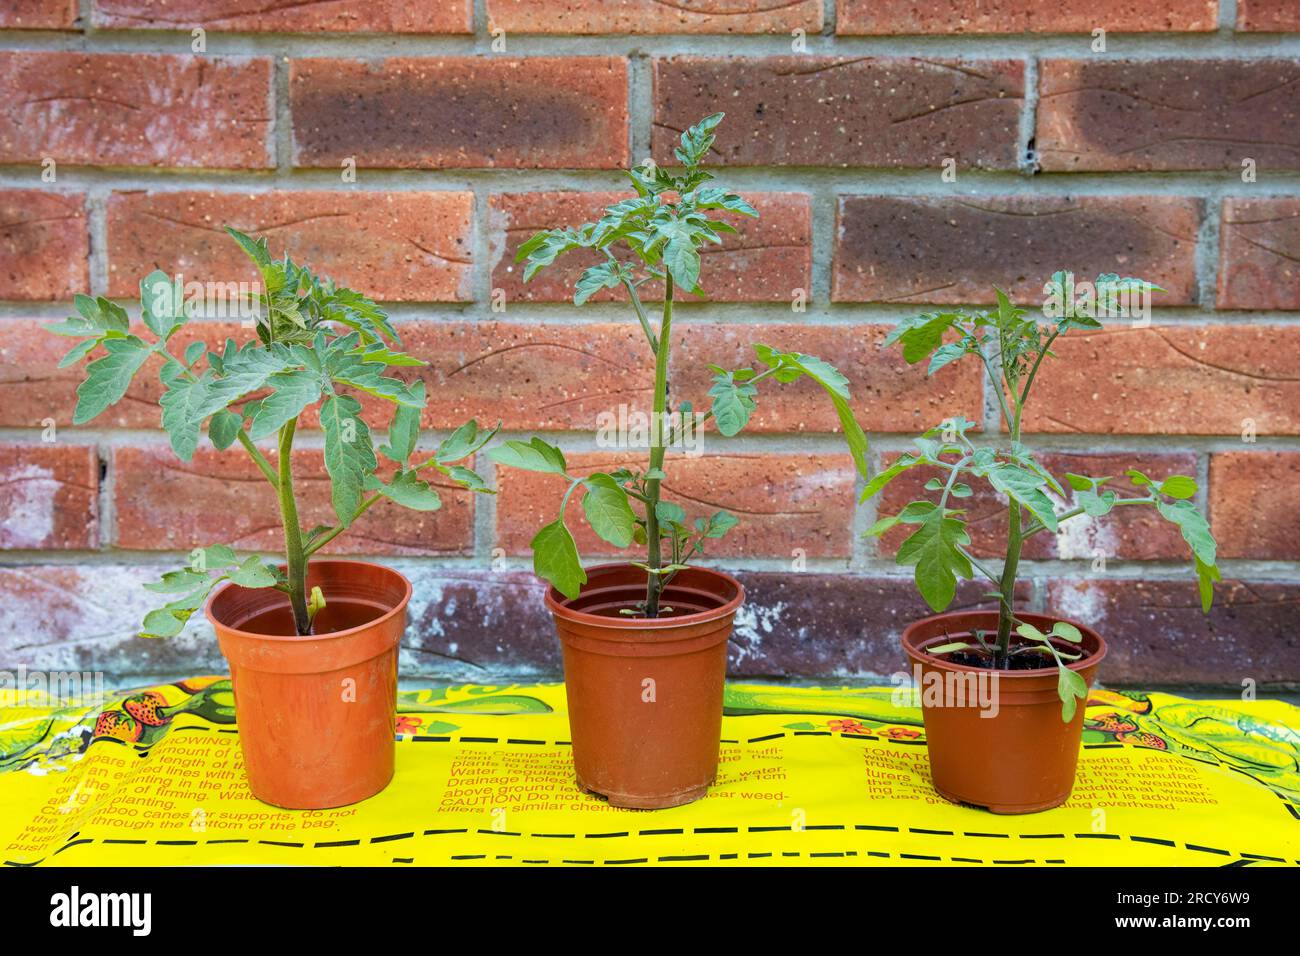 Tomato plants in pots ready to put into grow bag Stock Photo